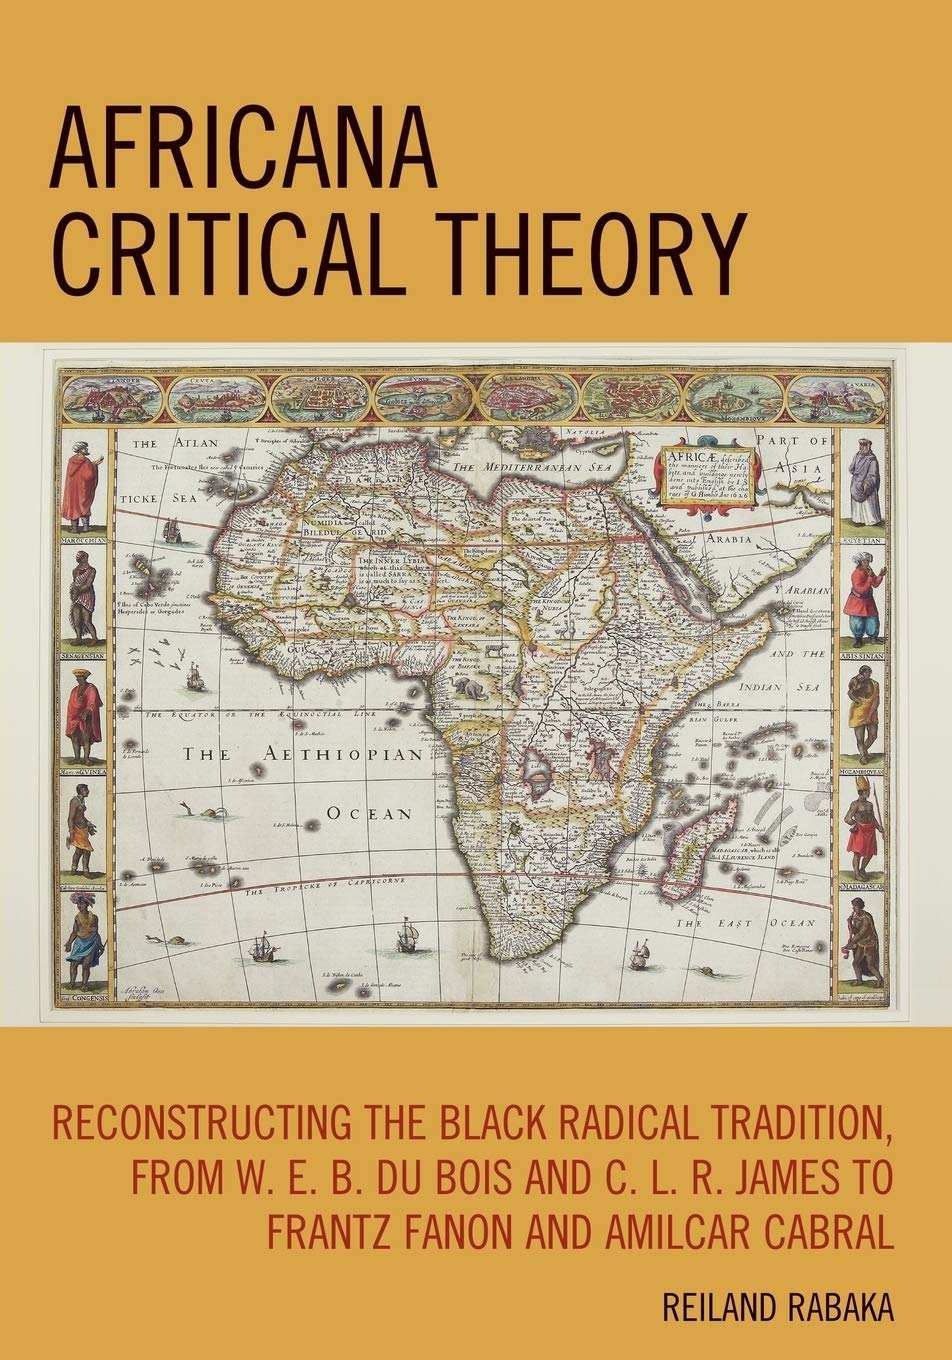 Africana Critical Theory: Reconstructing The Black Radical Tradition, From W. E. B. Du Bois and C. L. R. James to Frantz Fanon and Amilcar Cabral